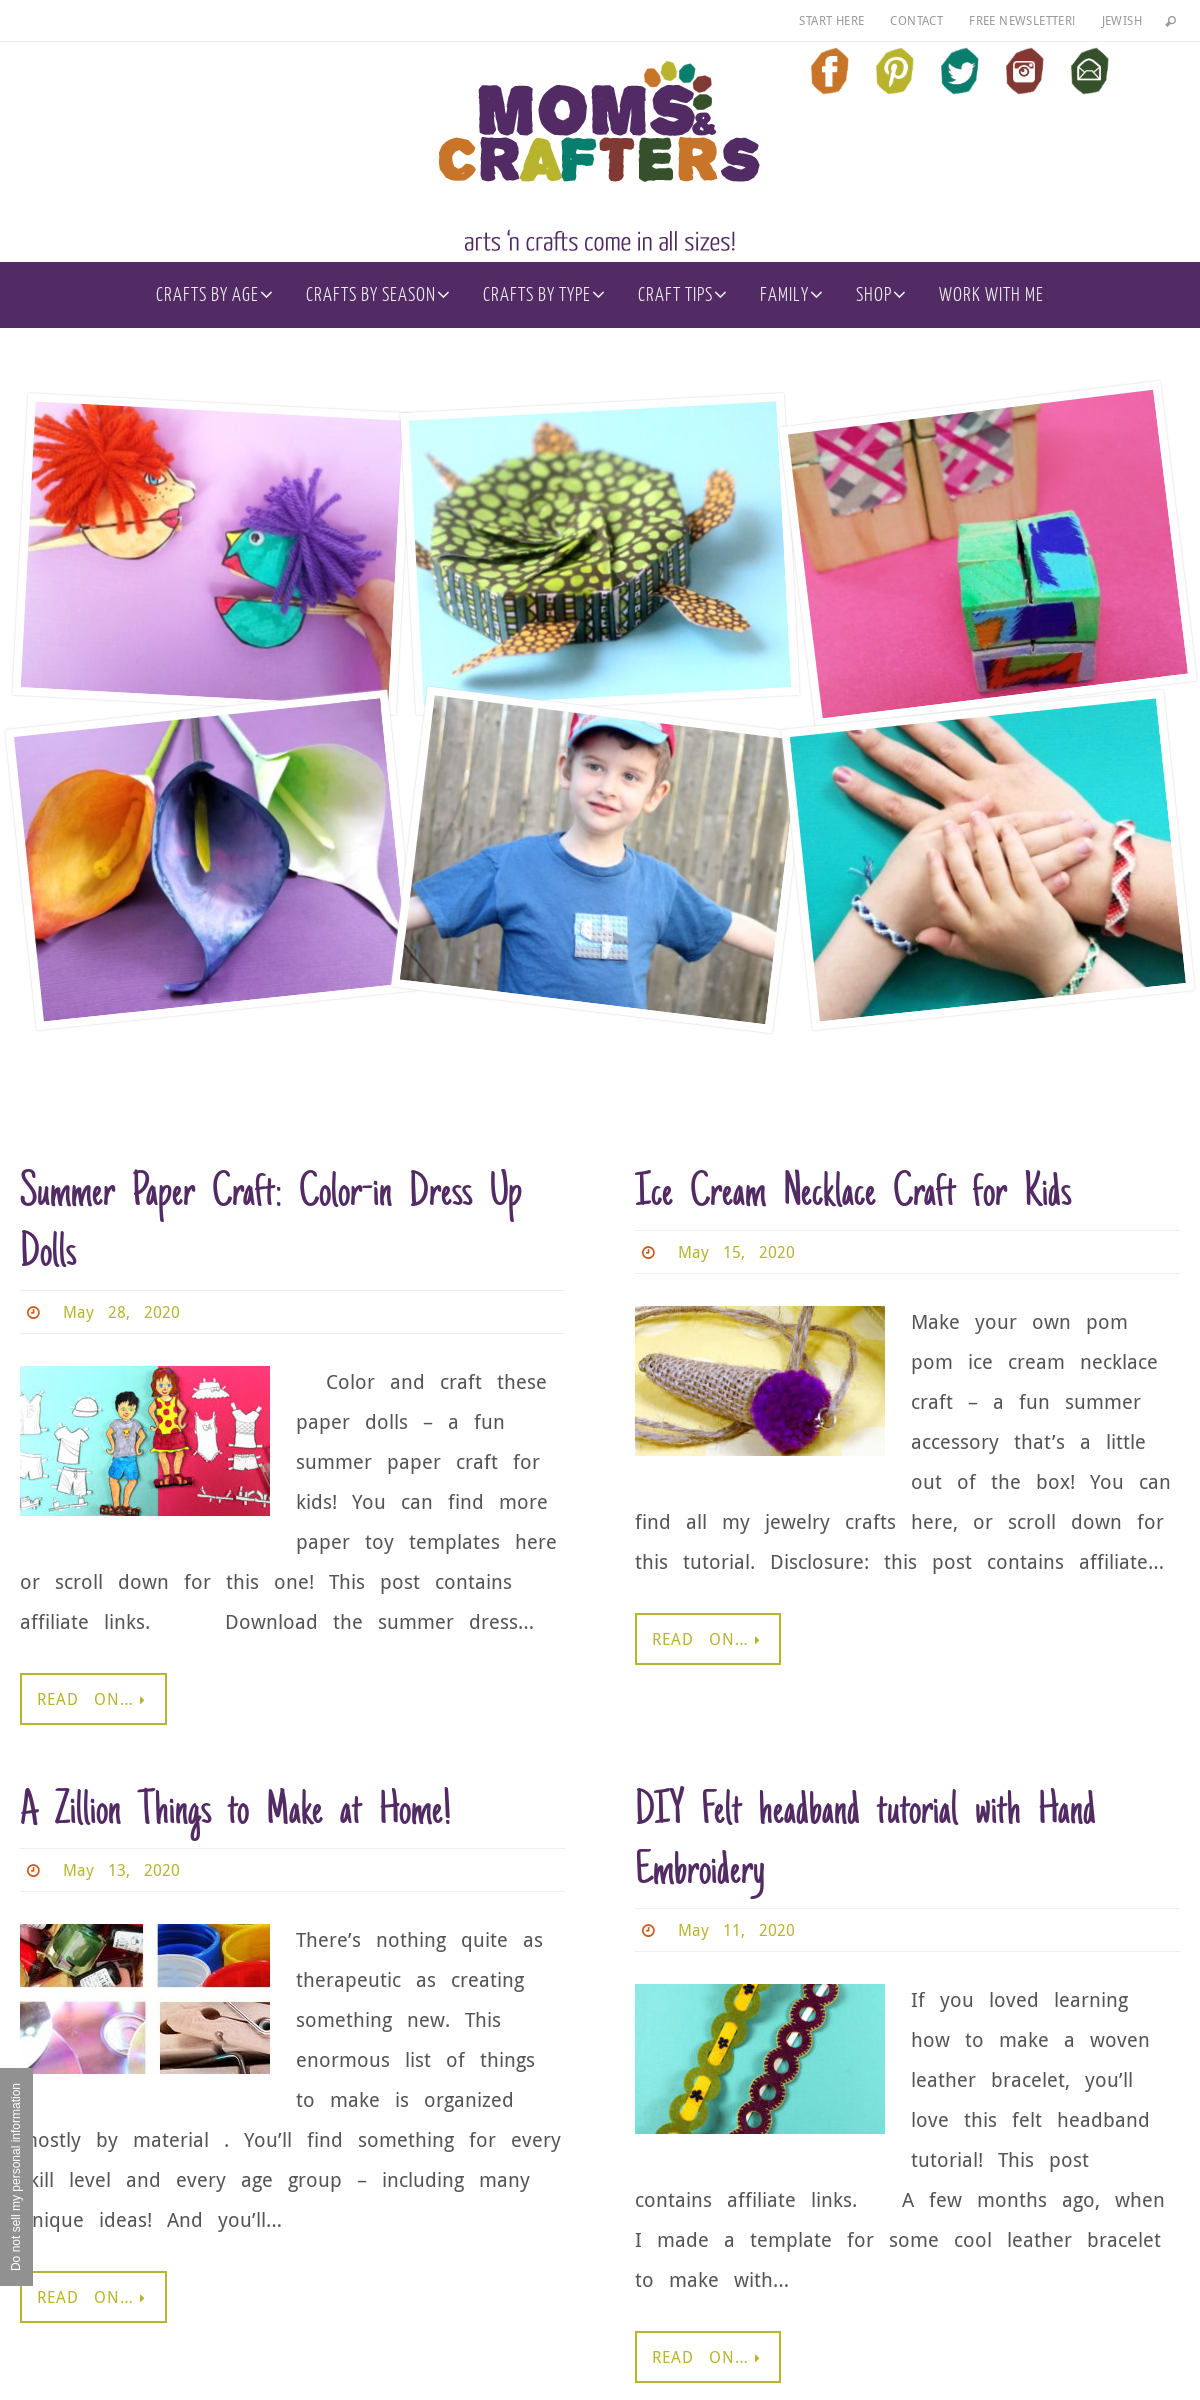 A complete backup of momsandcrafters.com